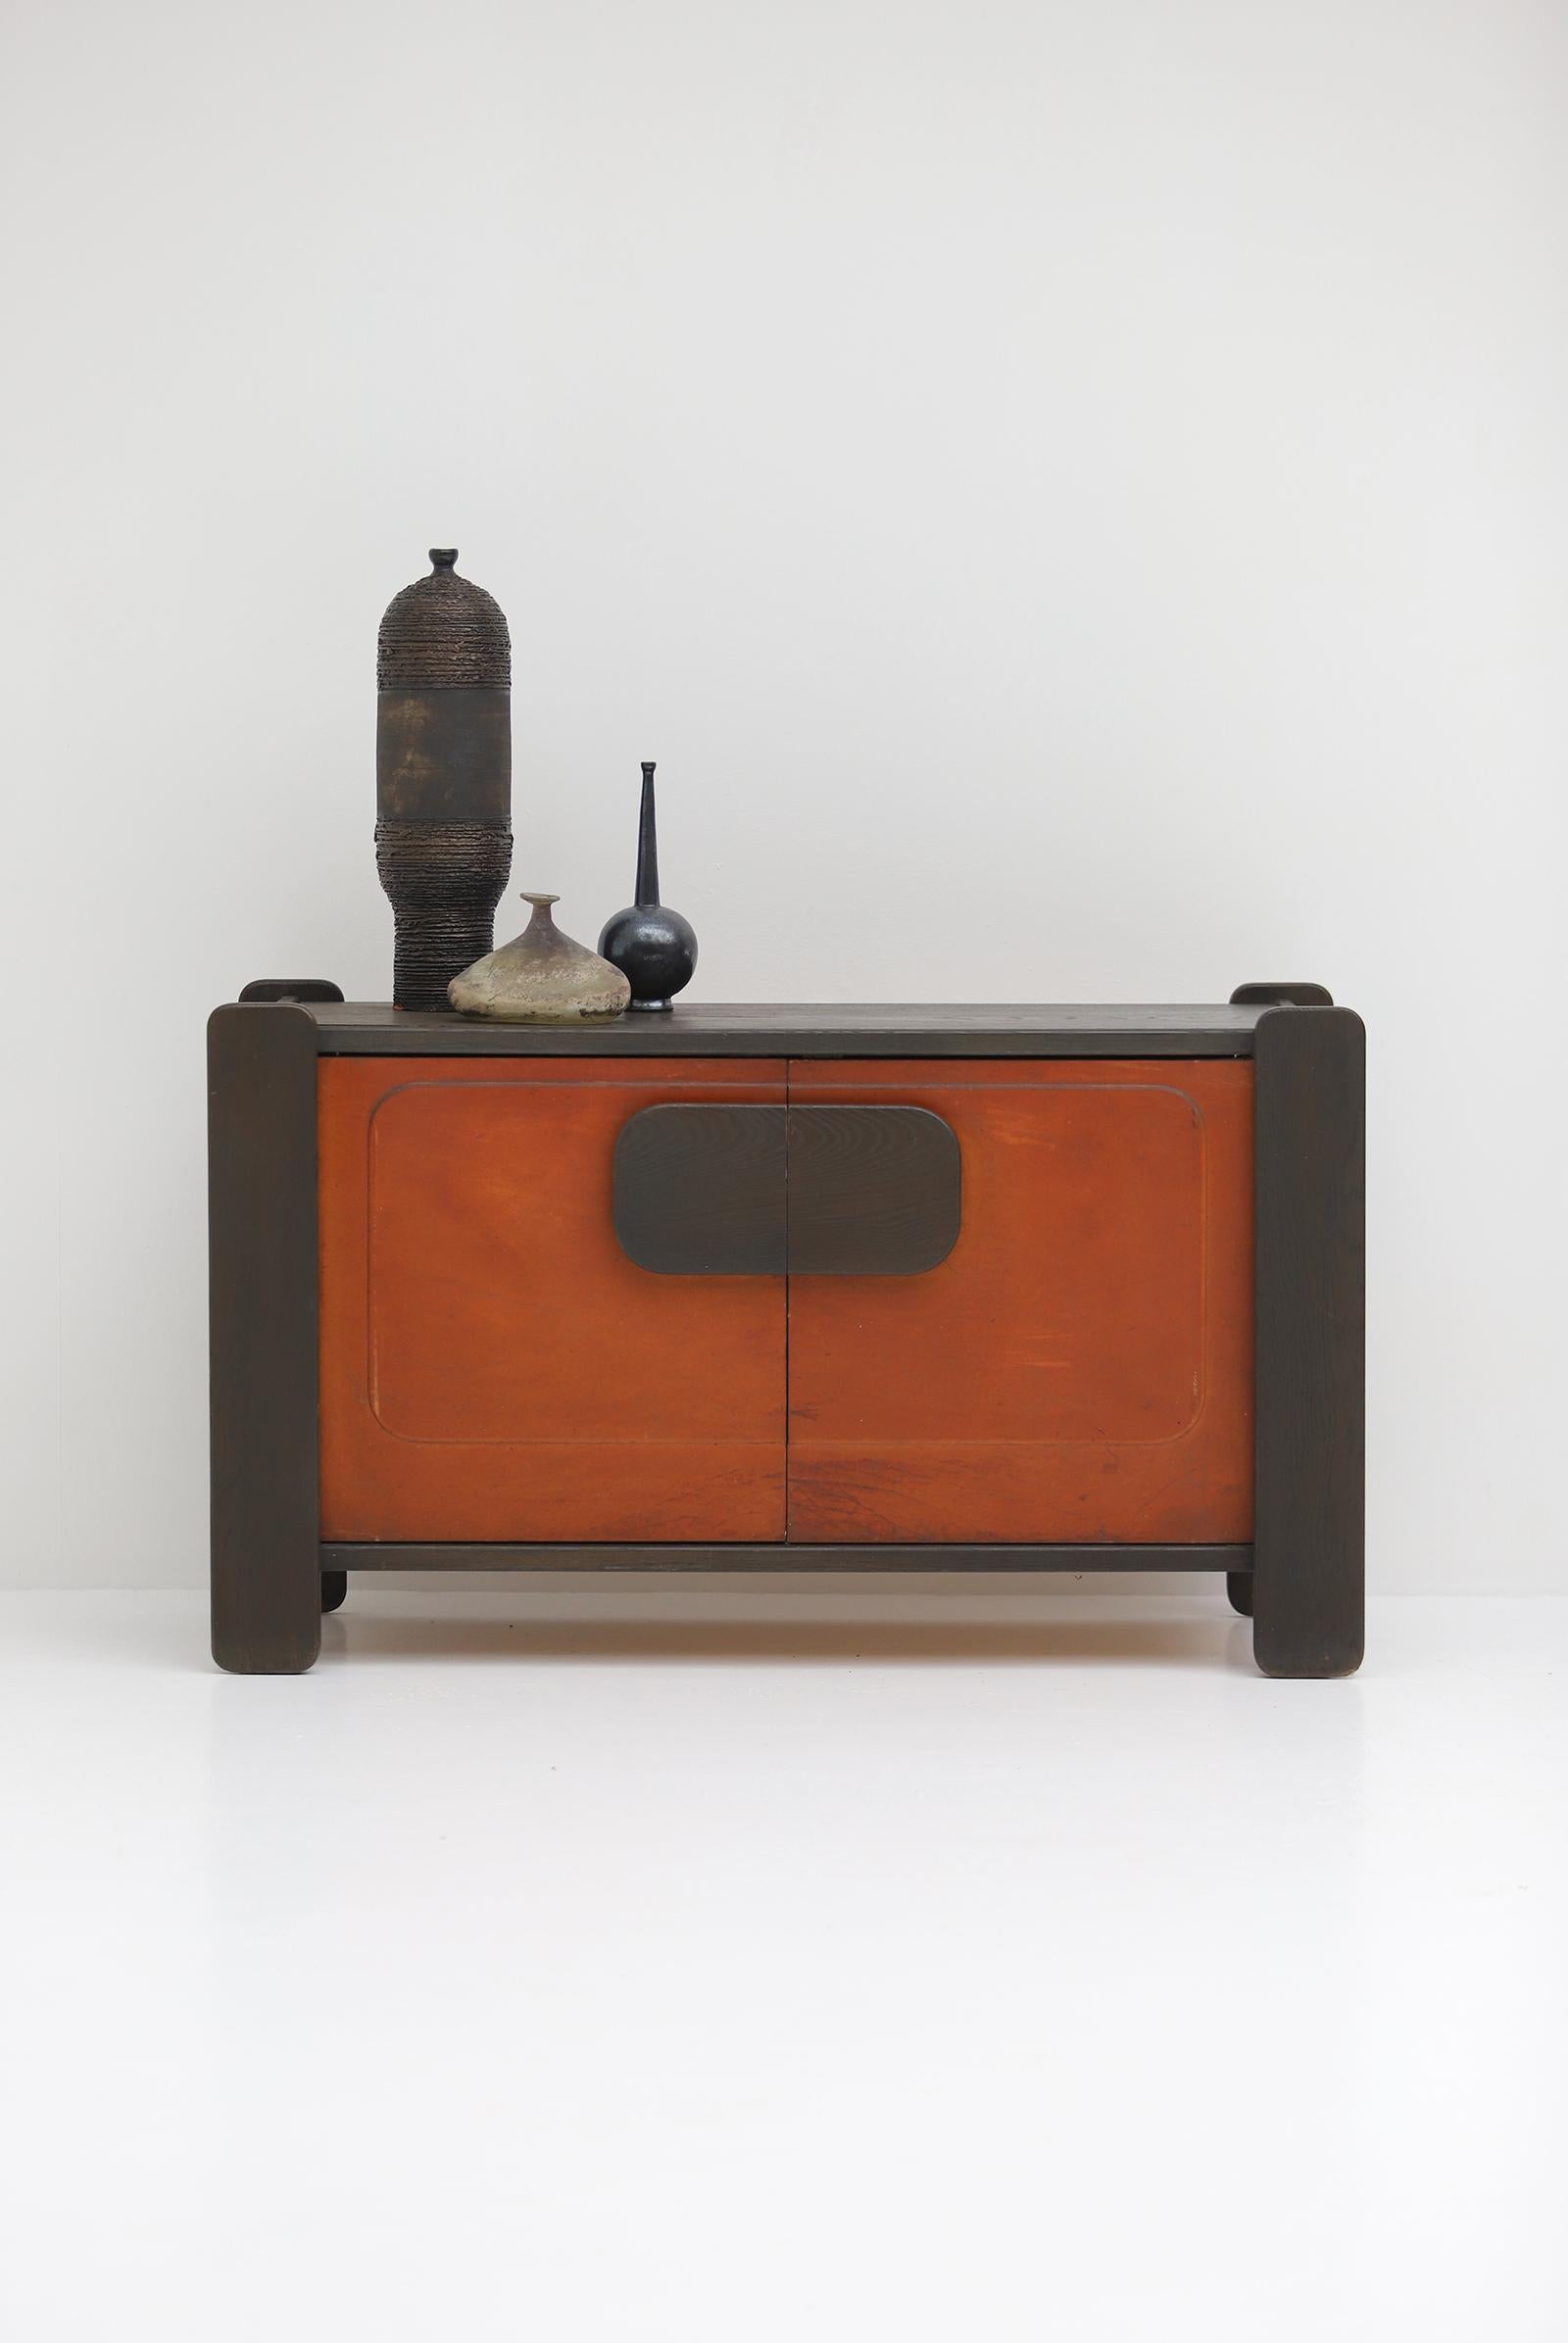 Belgian Mid-Century Cabinet with Leather Doors, by Hi-Plan Design Furniture 1976